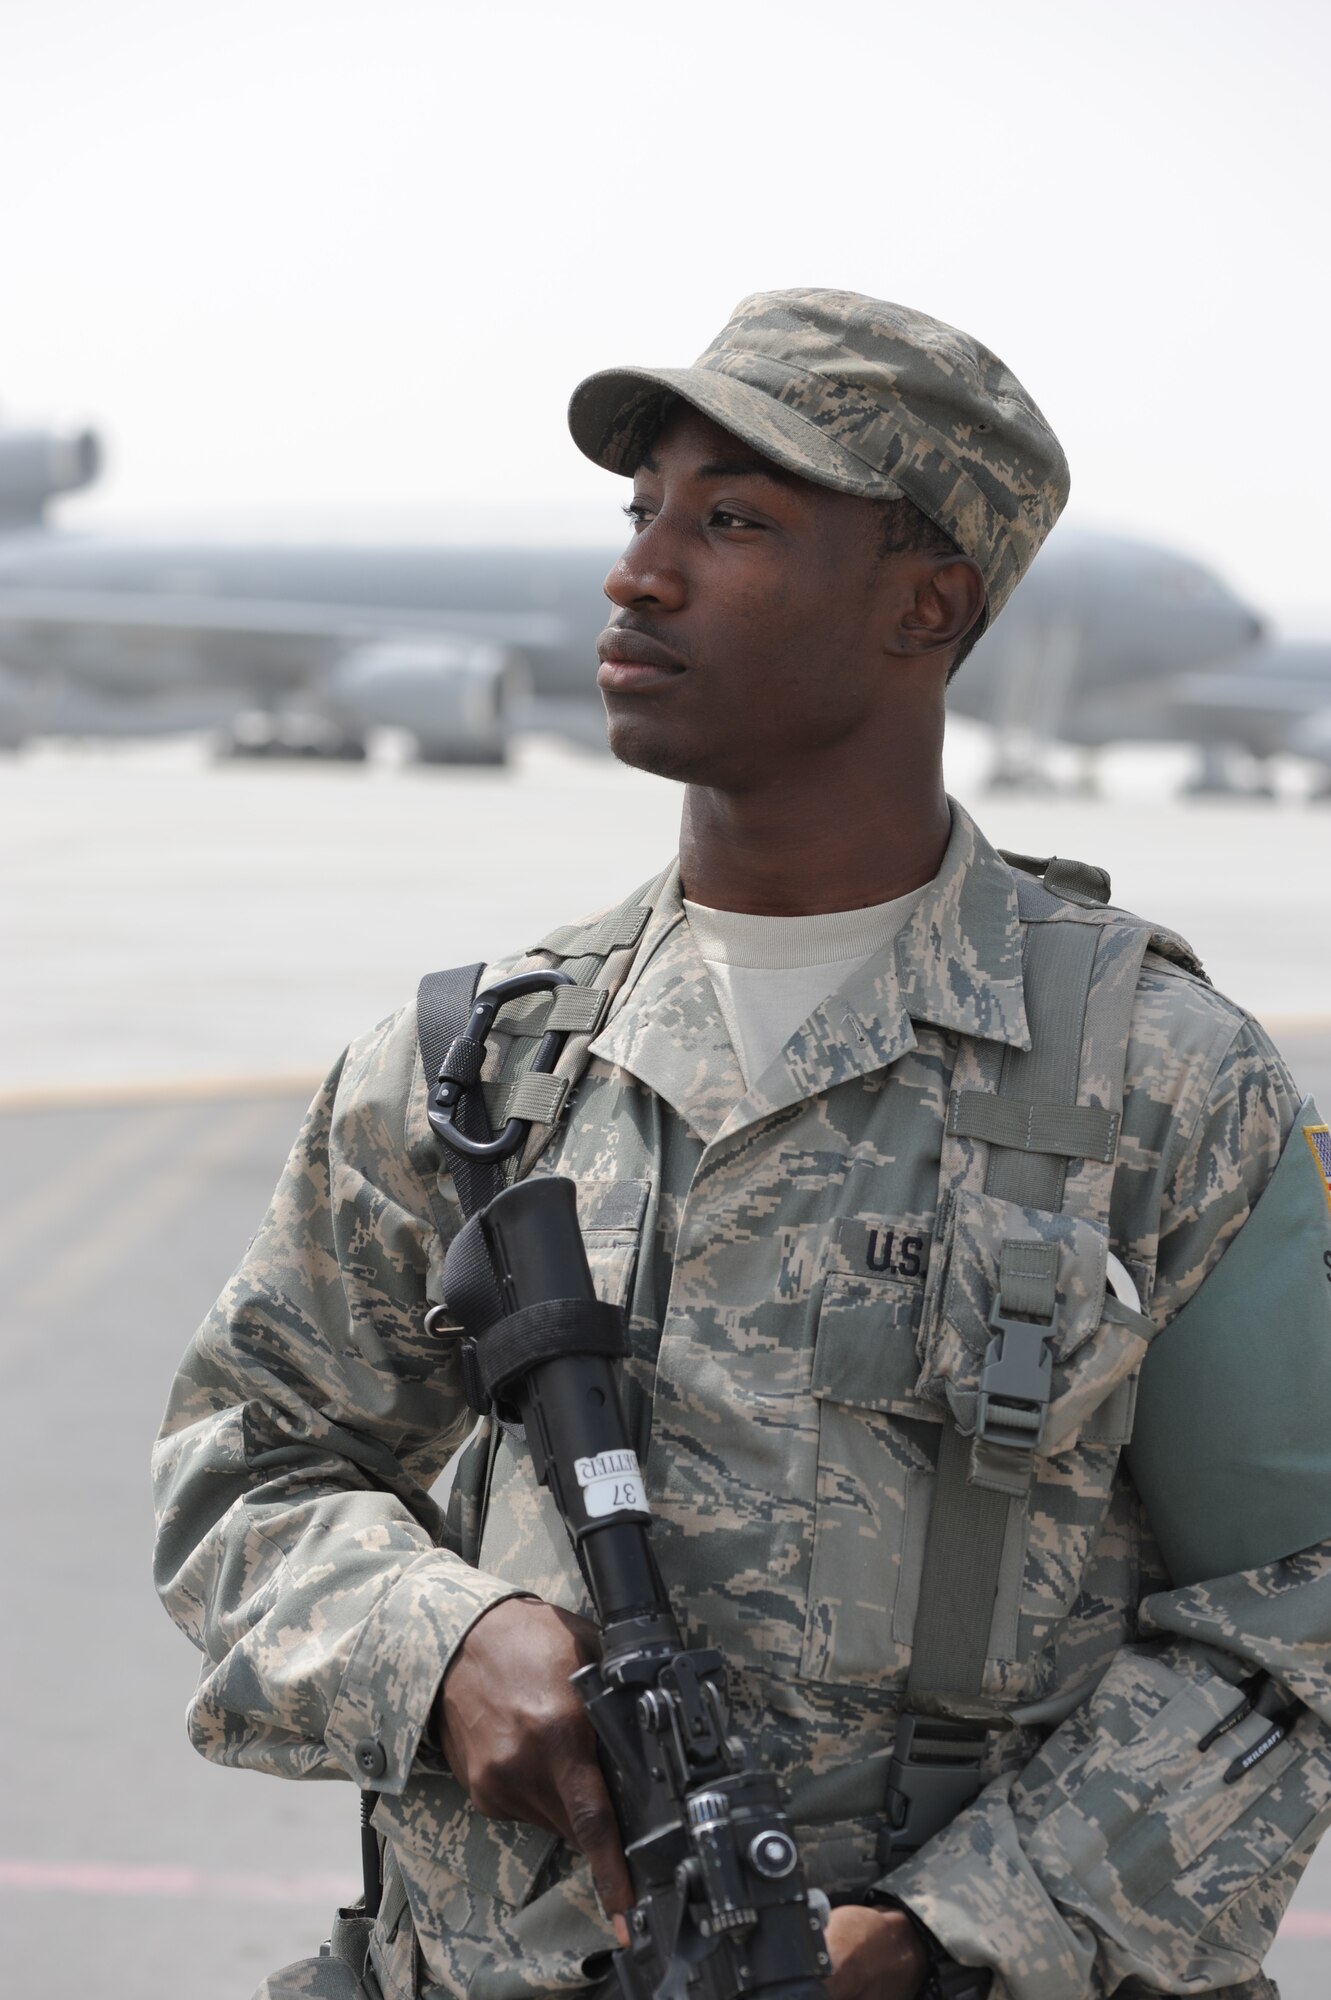 Senior Airman Michael Better, security forces journeyman with the 380th Expeditionary Security Forces Squadron, watches over a checkpoint near the flightline at a non-disclosed base in Southwest Asia on March 27, 2010. As a security forces Airman, Airman Better supports all security and force protection efforts for a deployed wing of more than 1,900 people and for billions of dollars worth of Air Force equipment and assets. He is deployed from the 628th Security Forces Squadron at Joint Base Charleston, S.C., and his hometown is Baltimore City, Md. (U.S. Air Force Photo/Master Sgt. Scott T. Sturkol/Released) 